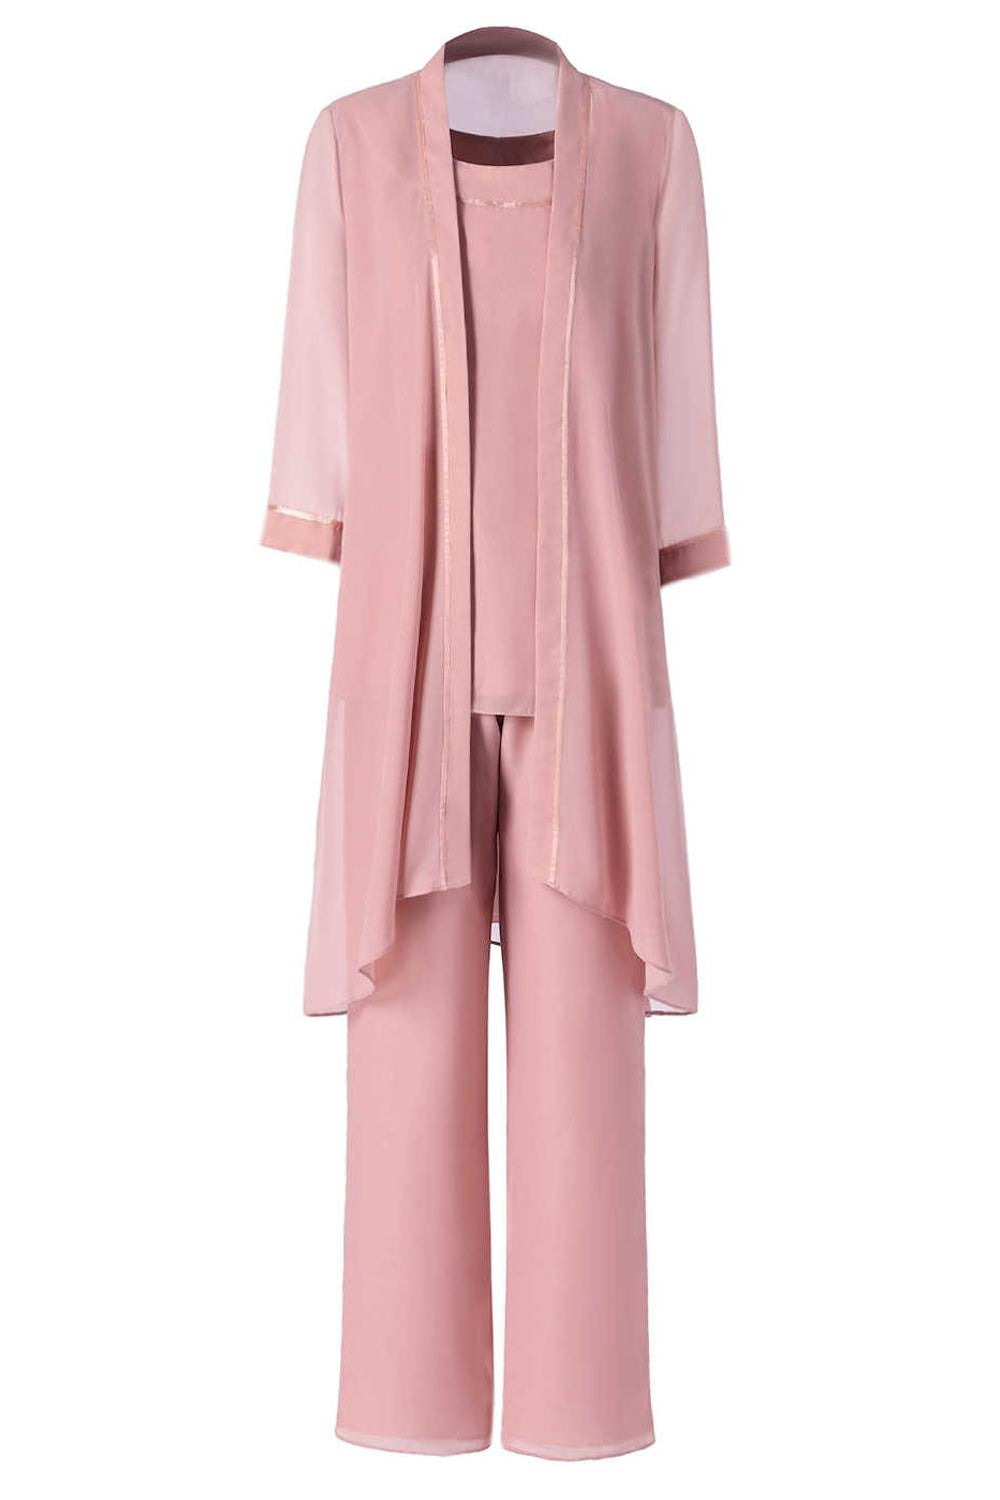 Spring Fashion Blush Pink Women Pants Suits For Wedding Mother of the Bride  Suit